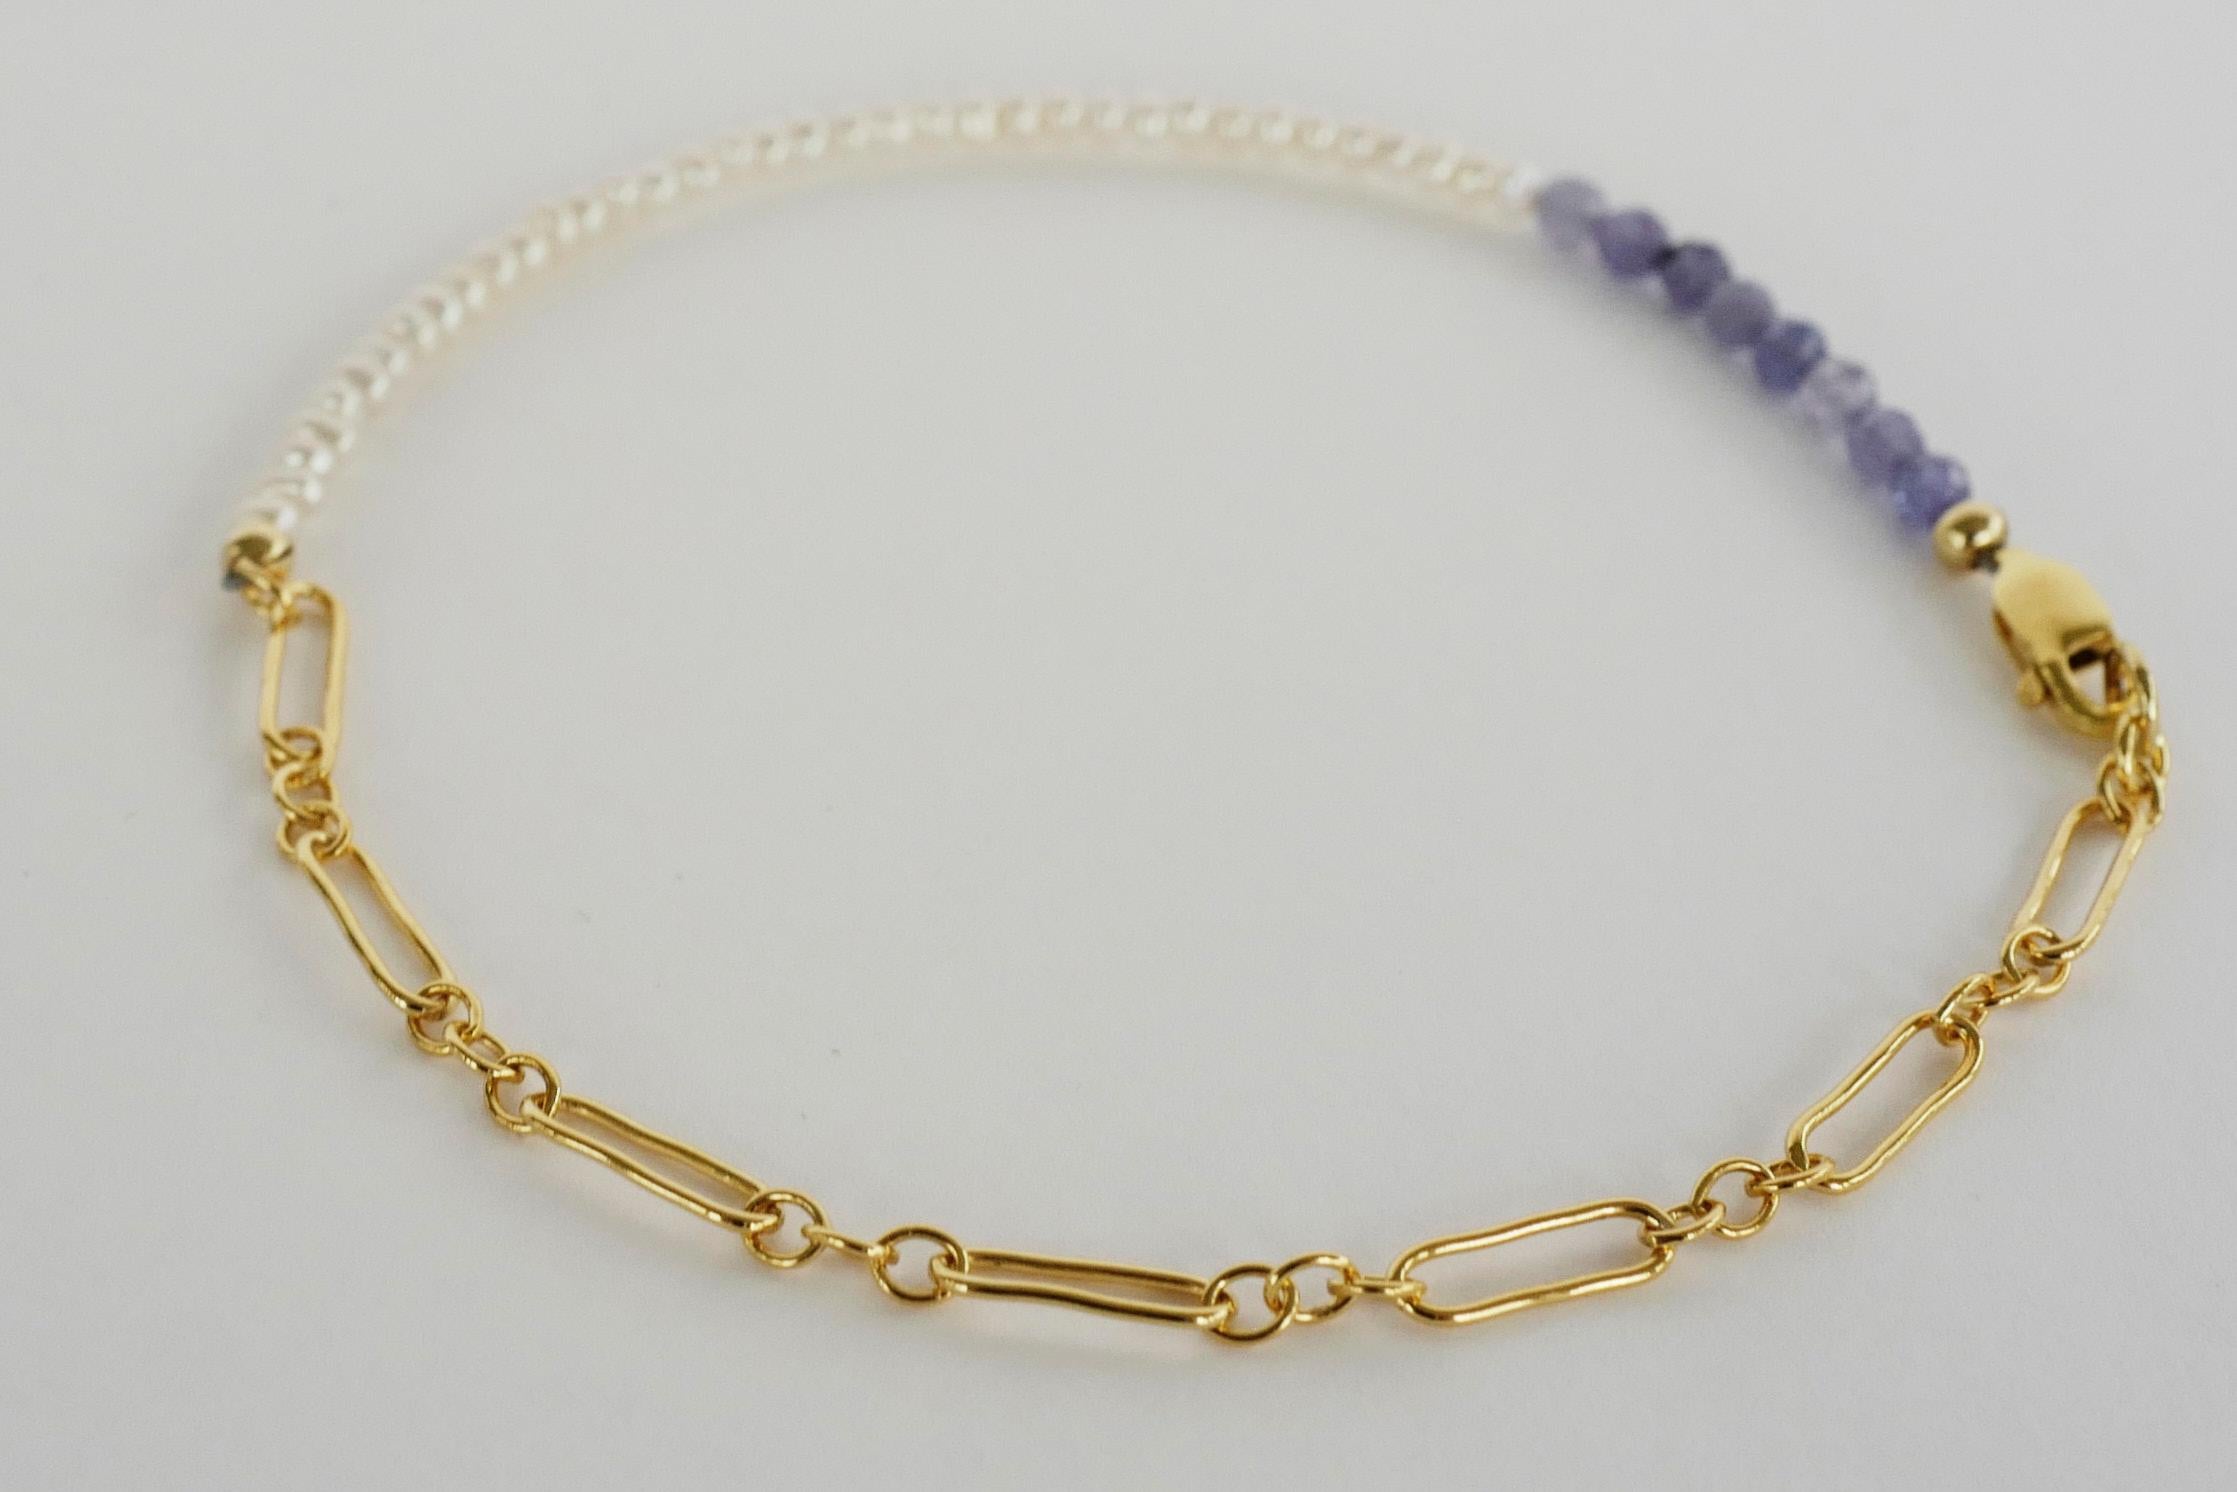 Round Cut Tanzanite White Pearl Gold Filled Chain Beaded Ankle Bracelet J Dauphin For Sale